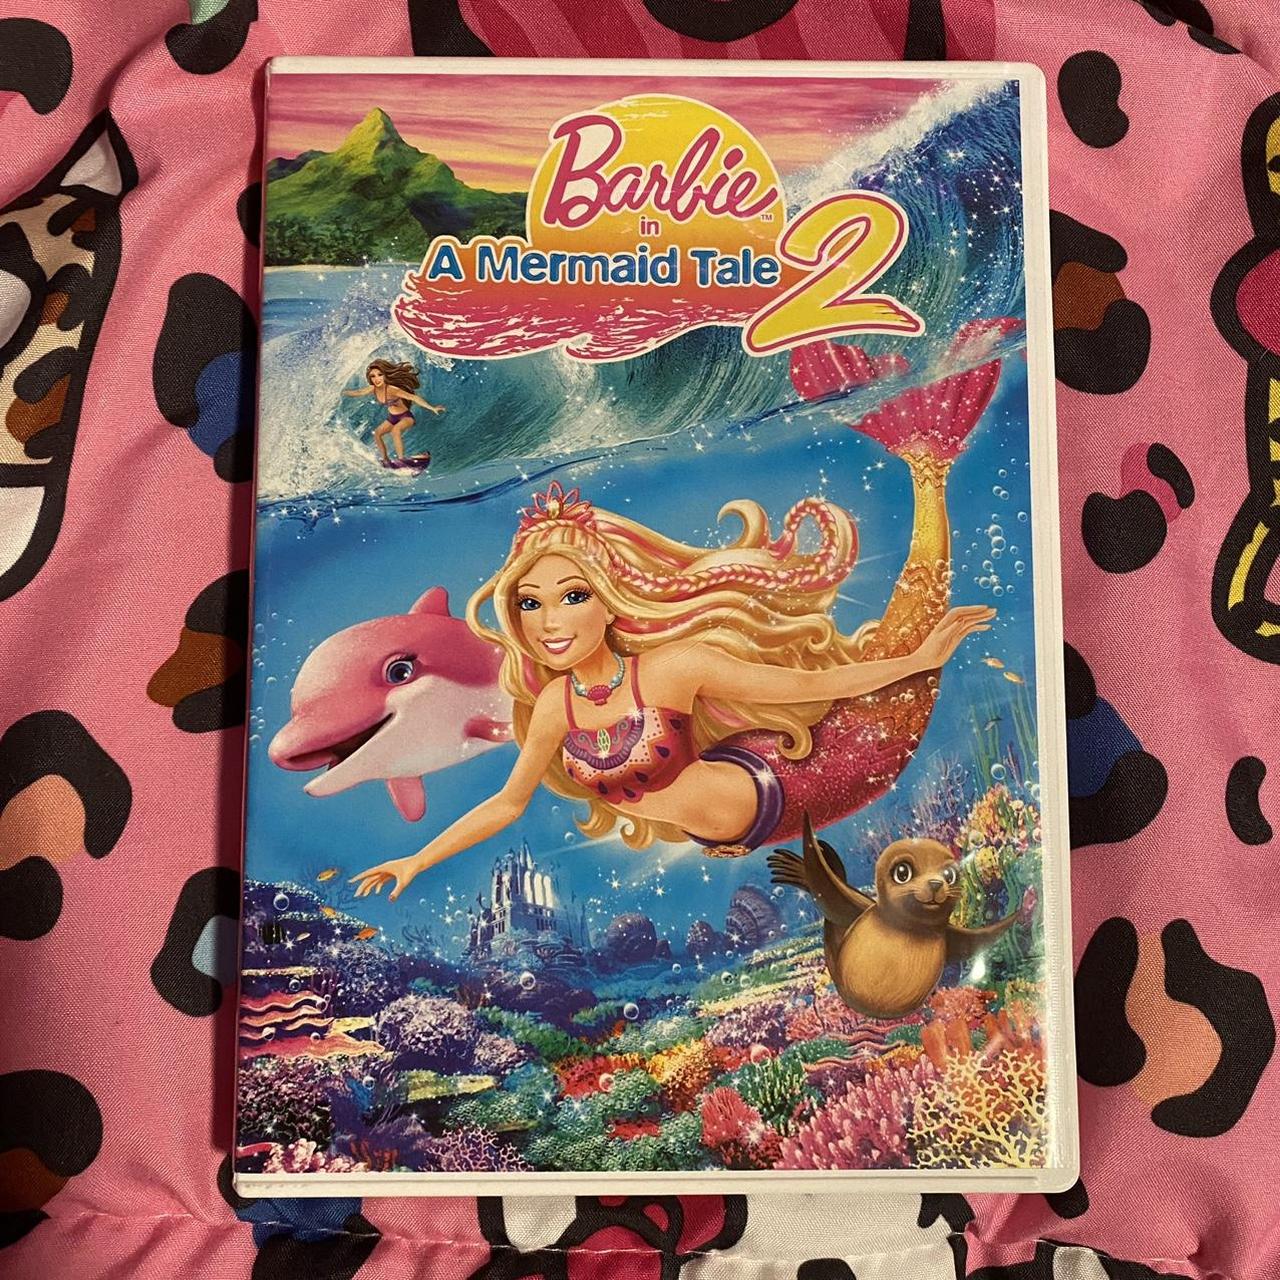 Barbie: 2-Movie Collection (Barbie in A Mermaid Tale/Barbie in a Mermaid  Tale 2) (DVD)